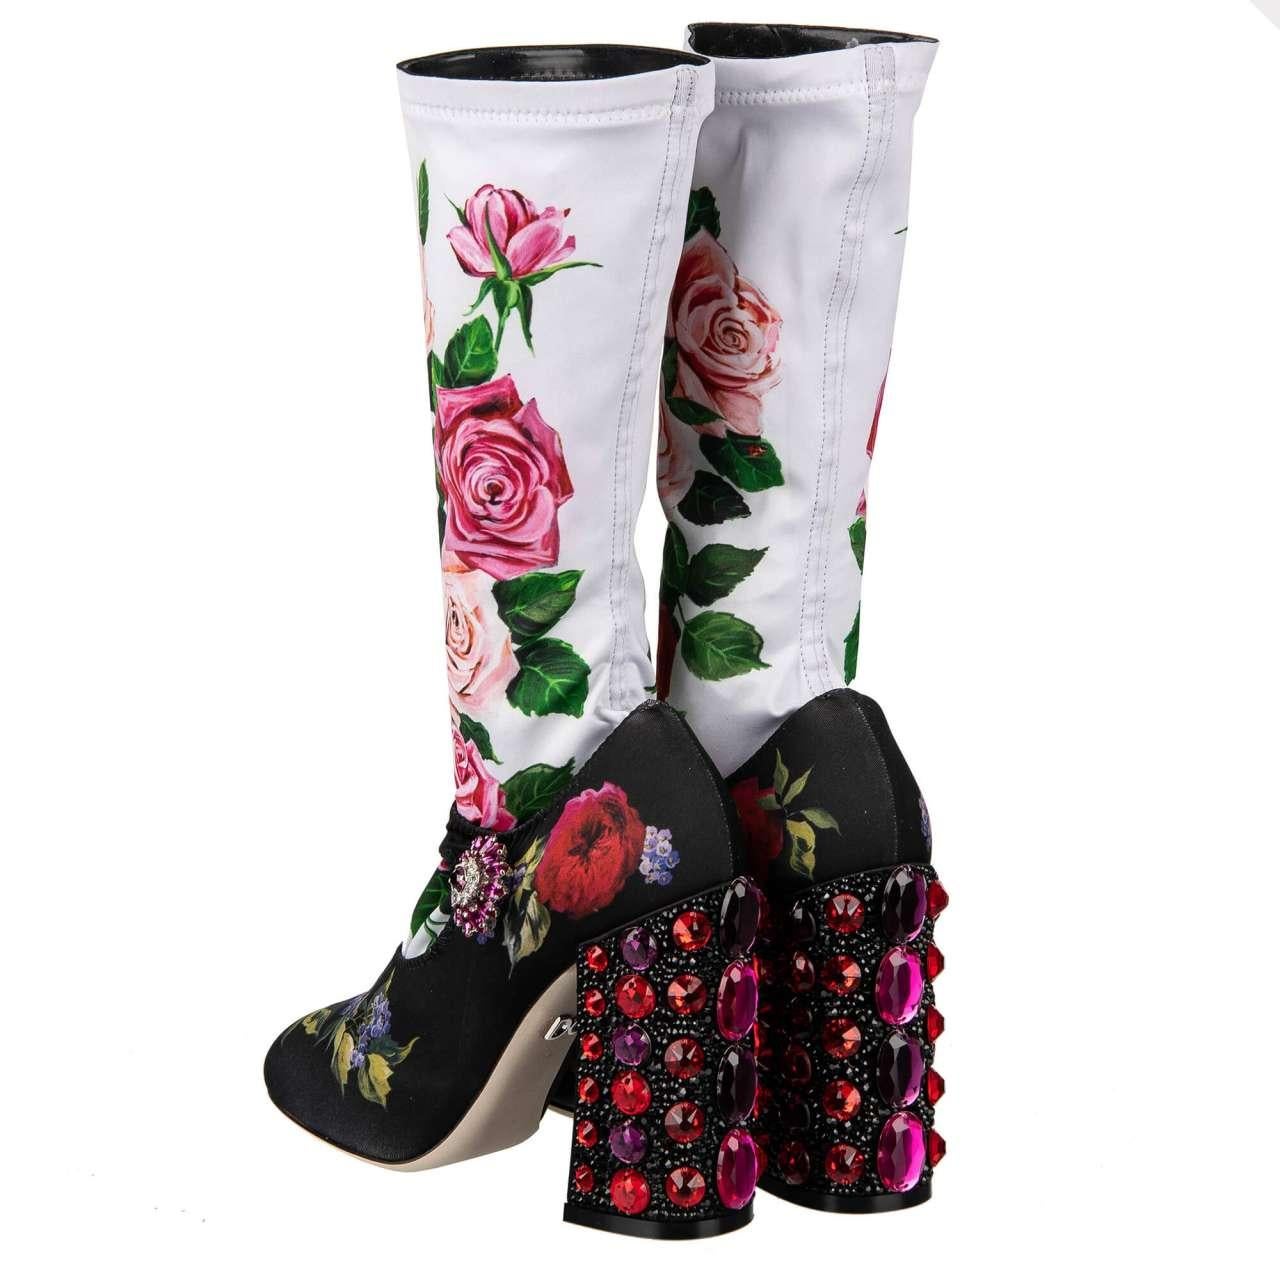 D&G Roses Printed Elastic Socks Pumps VALLY with Crystals Heel Black White 38 In Excellent Condition For Sale In Erkrath, DE